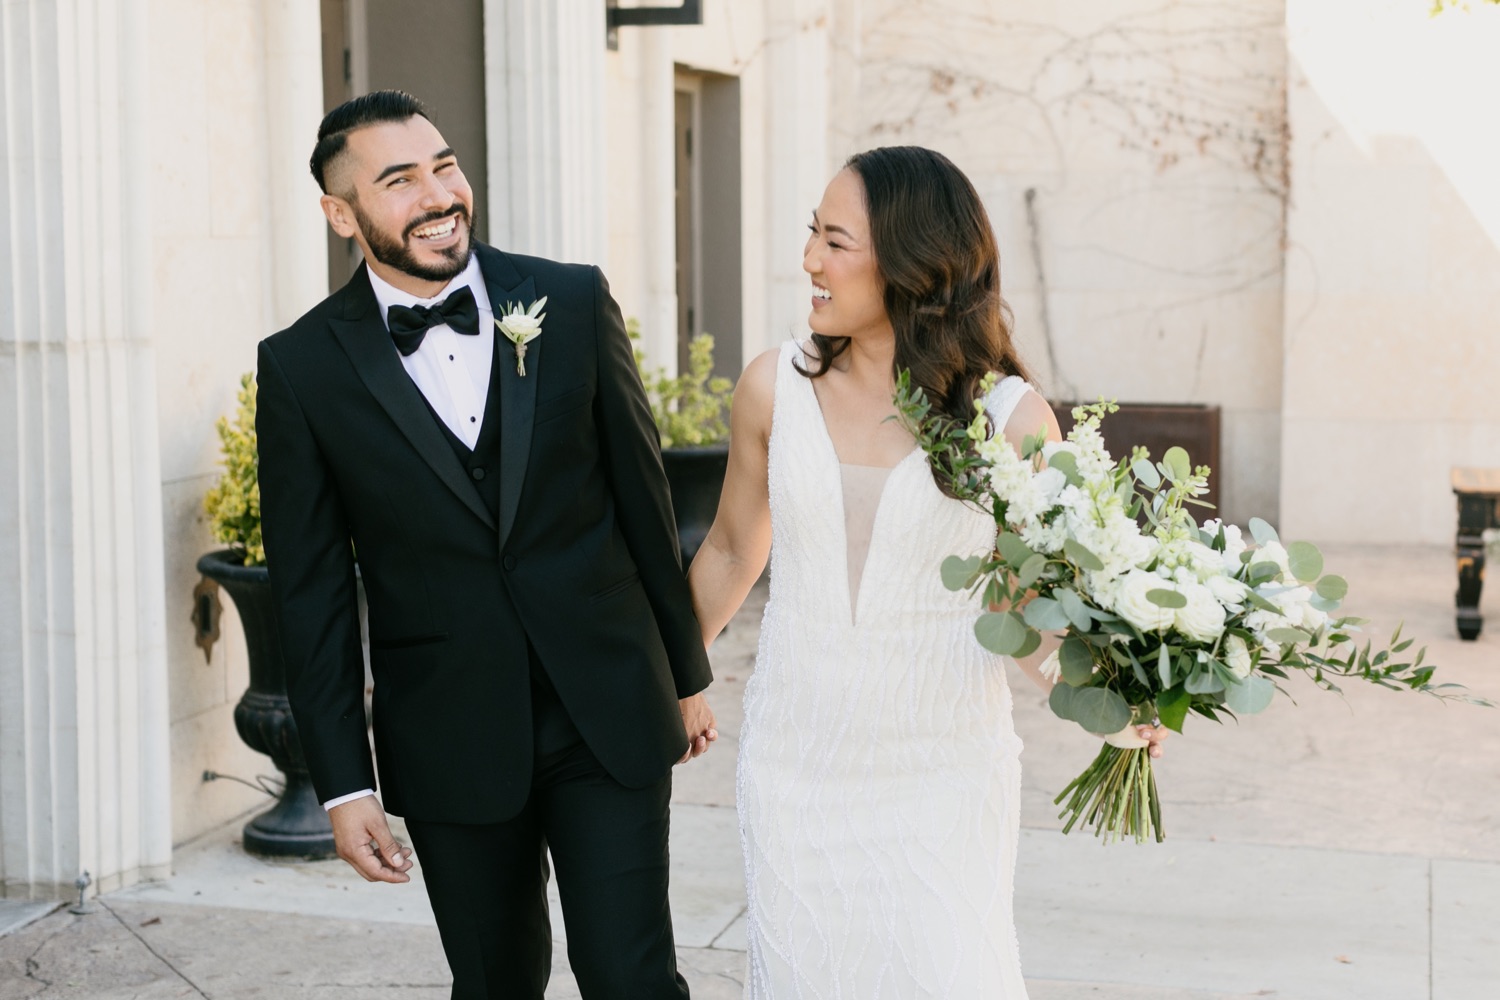 Tooth and nail winery wedding with bride and groom walking together by tayler enerle photography